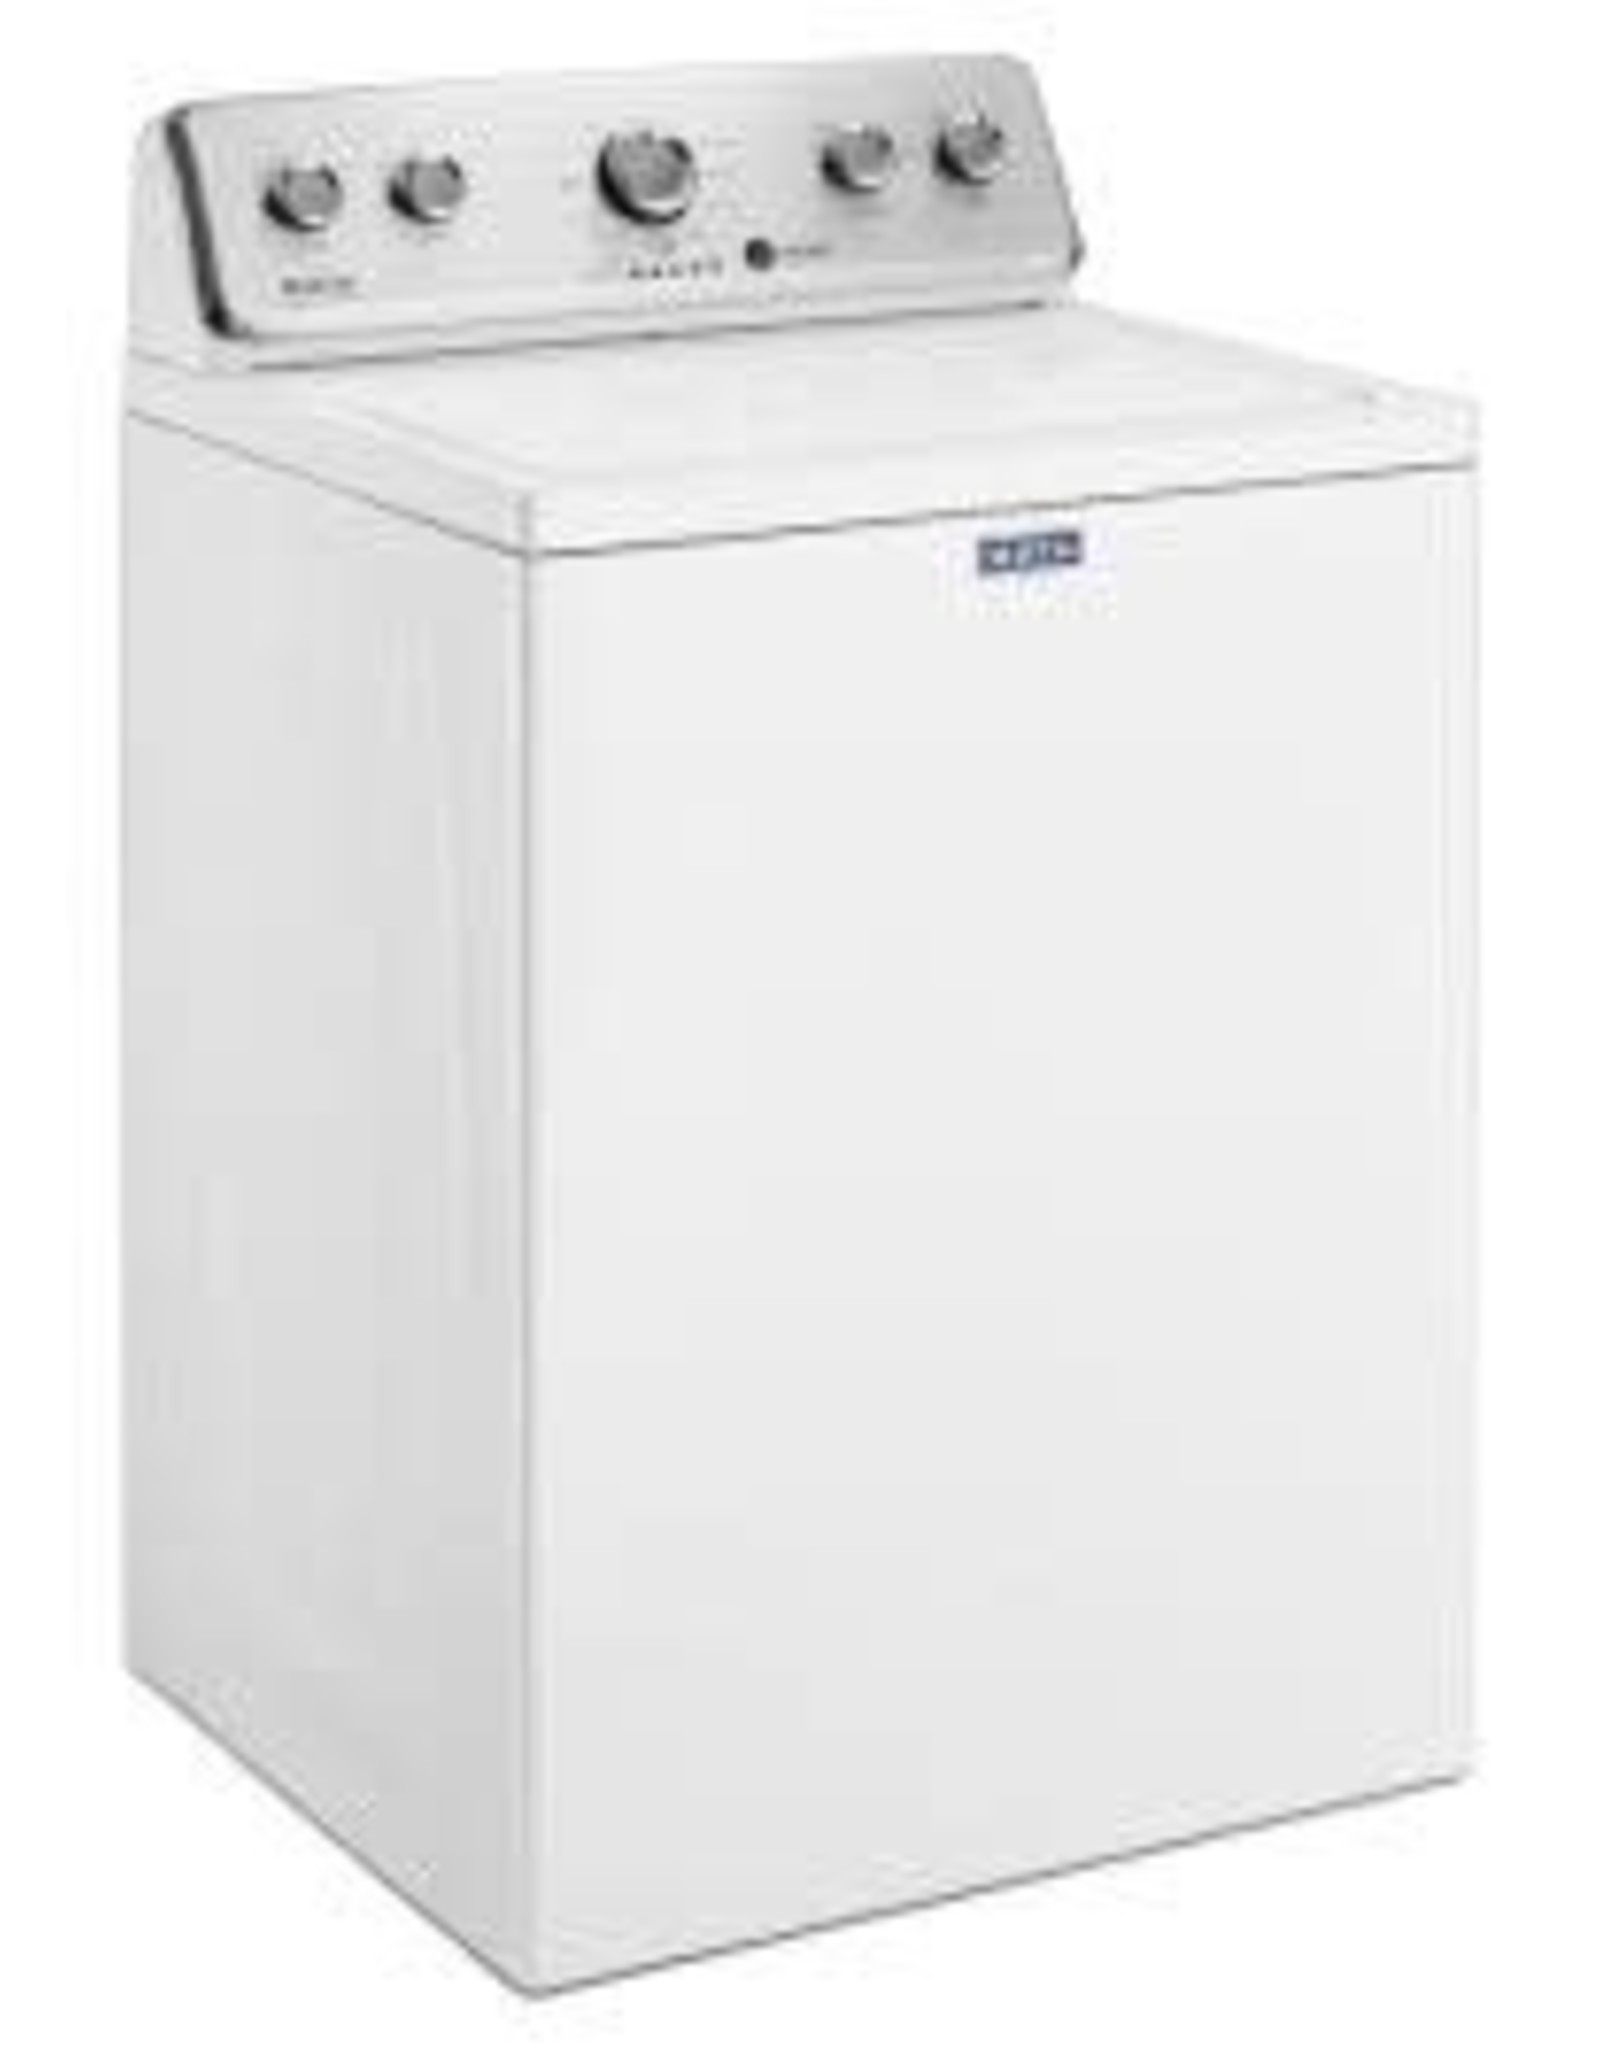 MVWC465HW 3.8 cu. ft. High-Efficiency White Top Load Washing Machine with Deep Fill Option